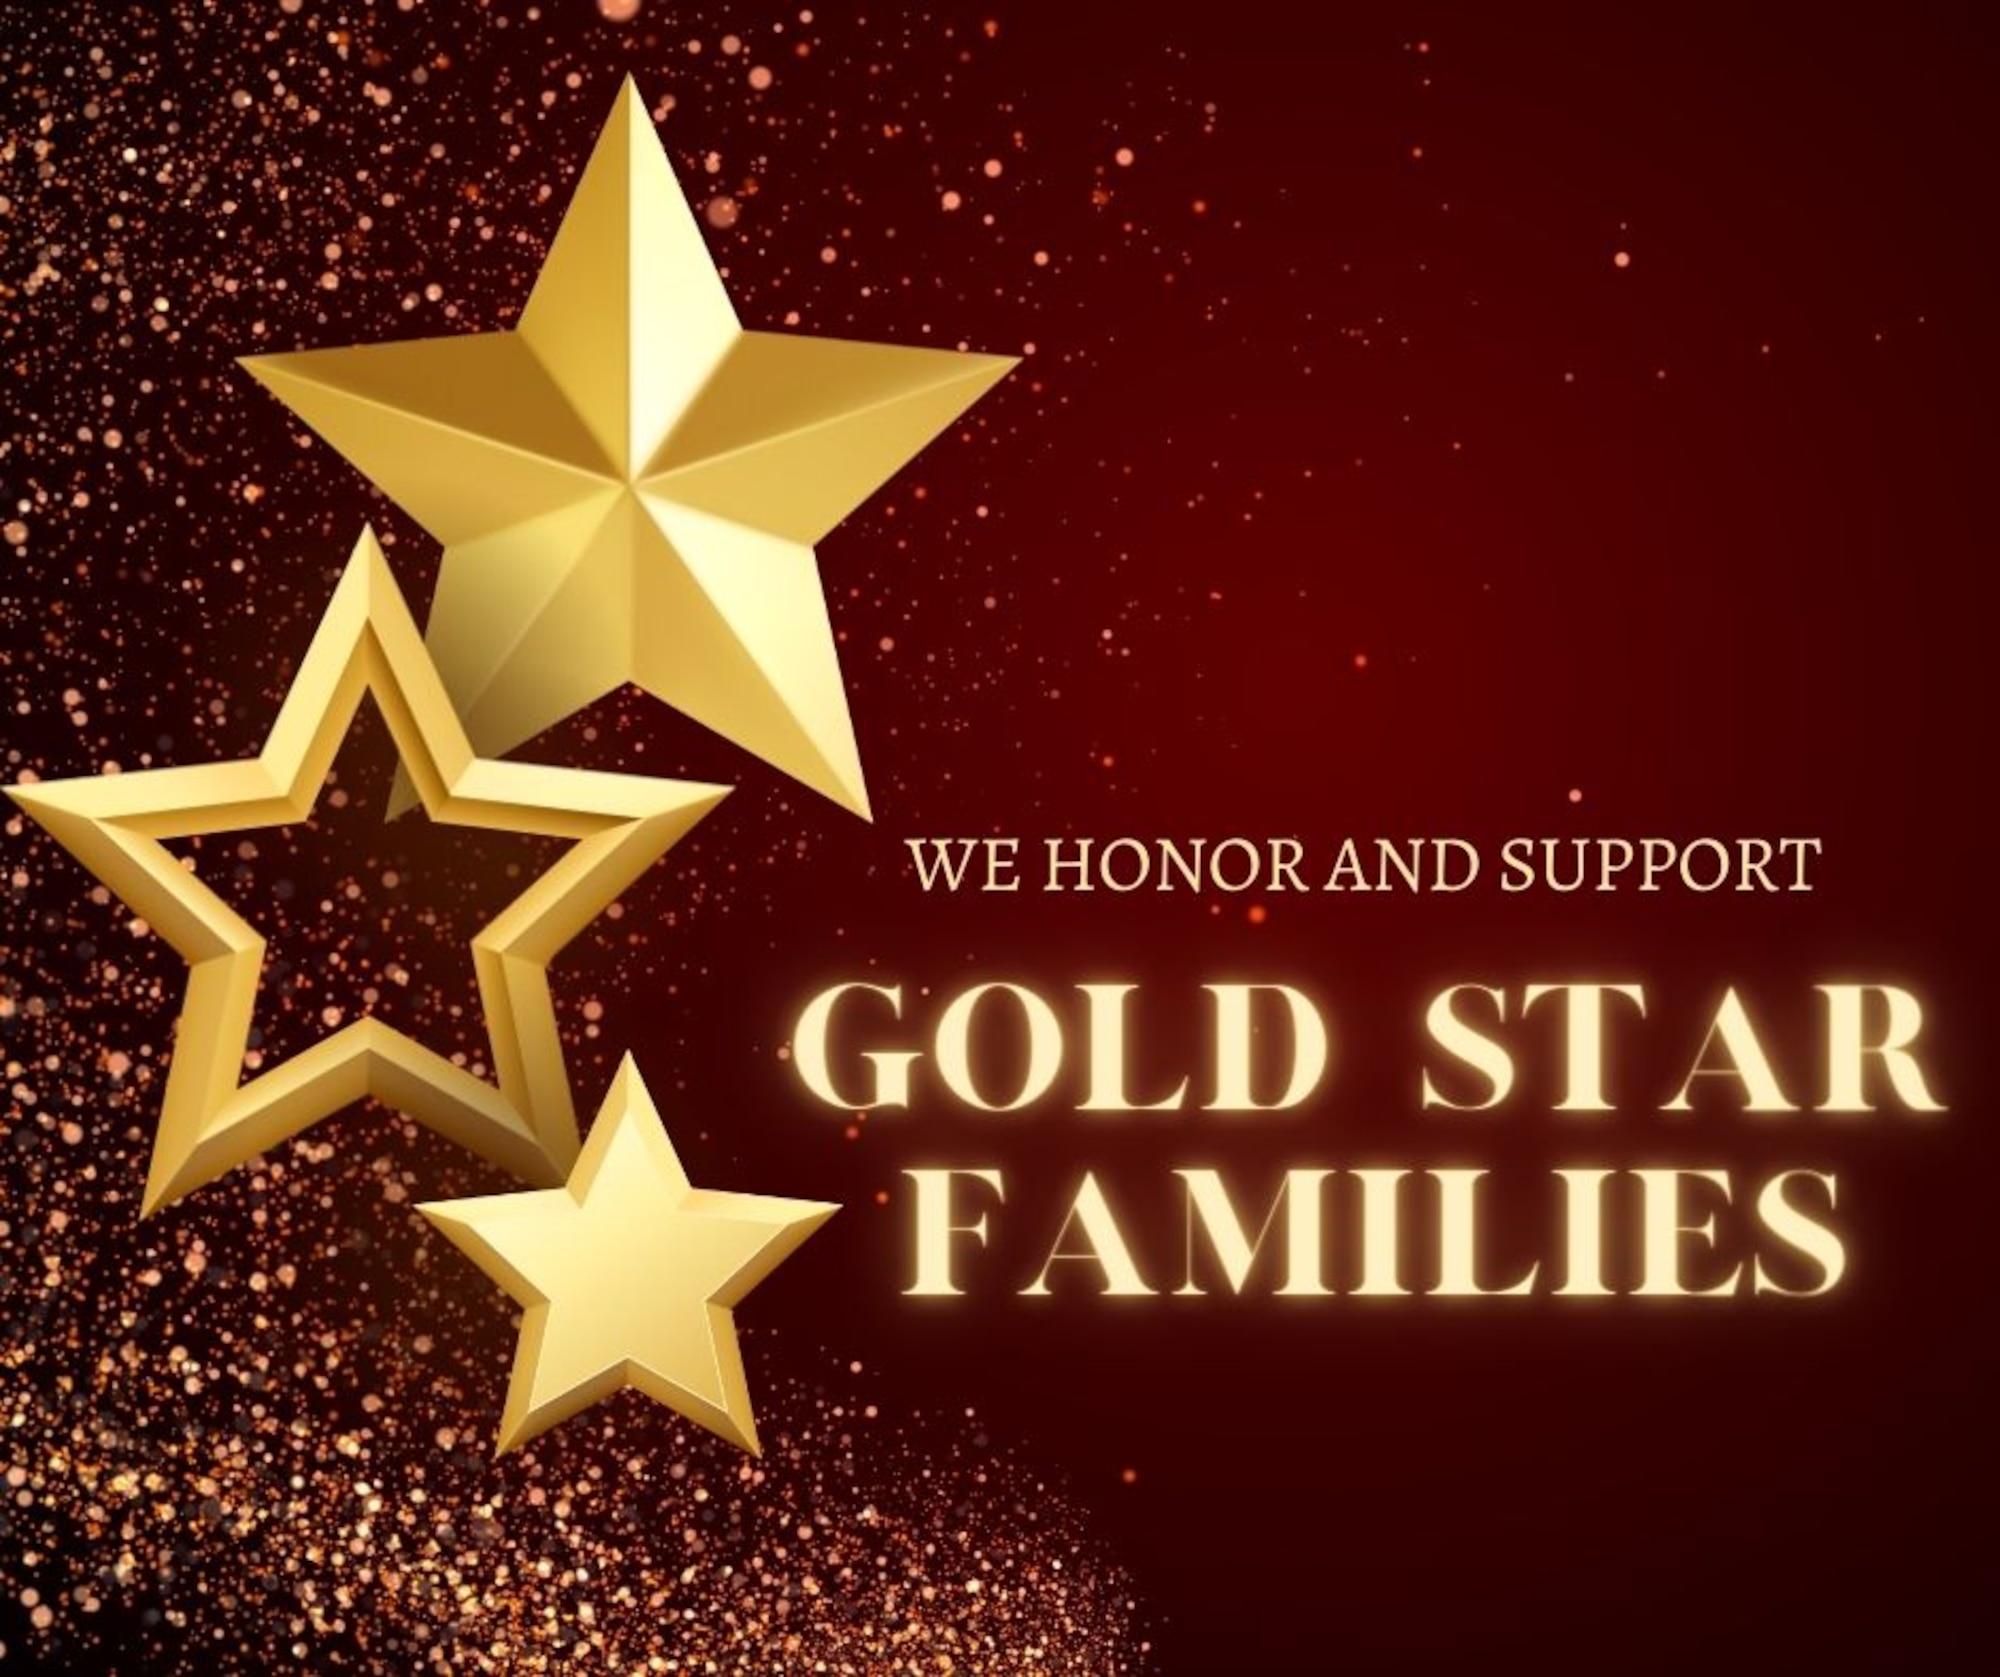 On Sunday, 25 September, the United States will recognize Mothers who lost a service member in the line of duty. The week proceeding is also recognized as Gold Star Families Week.